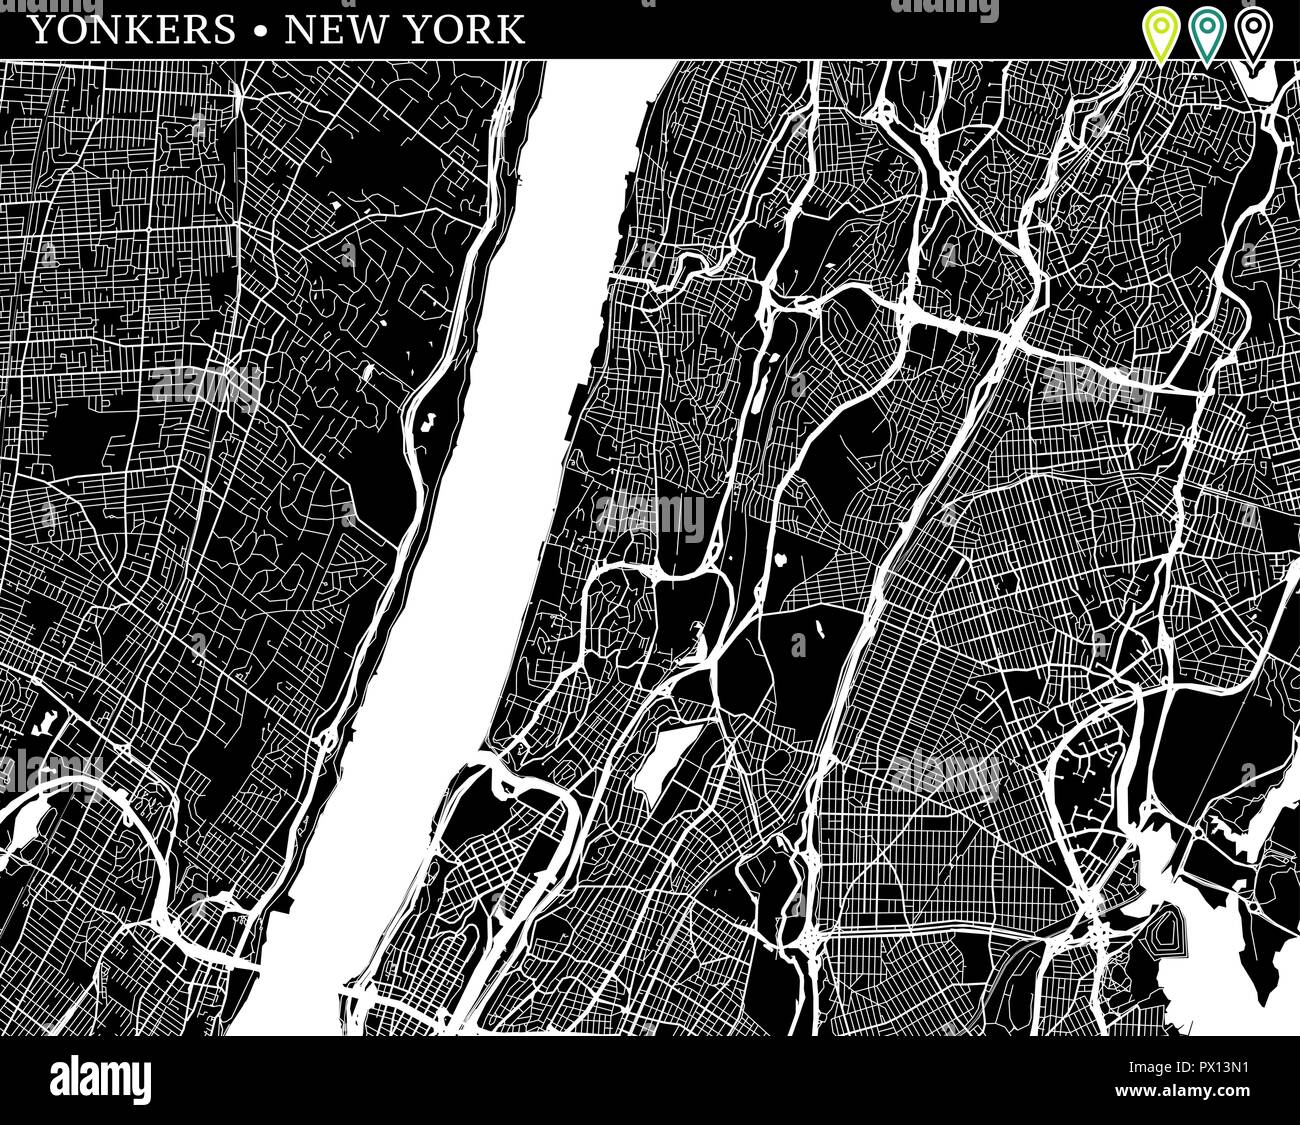 simple map of new york black and white Simple Map Of Yonkers New York Usa Black And White Version For simple map of new york black and white